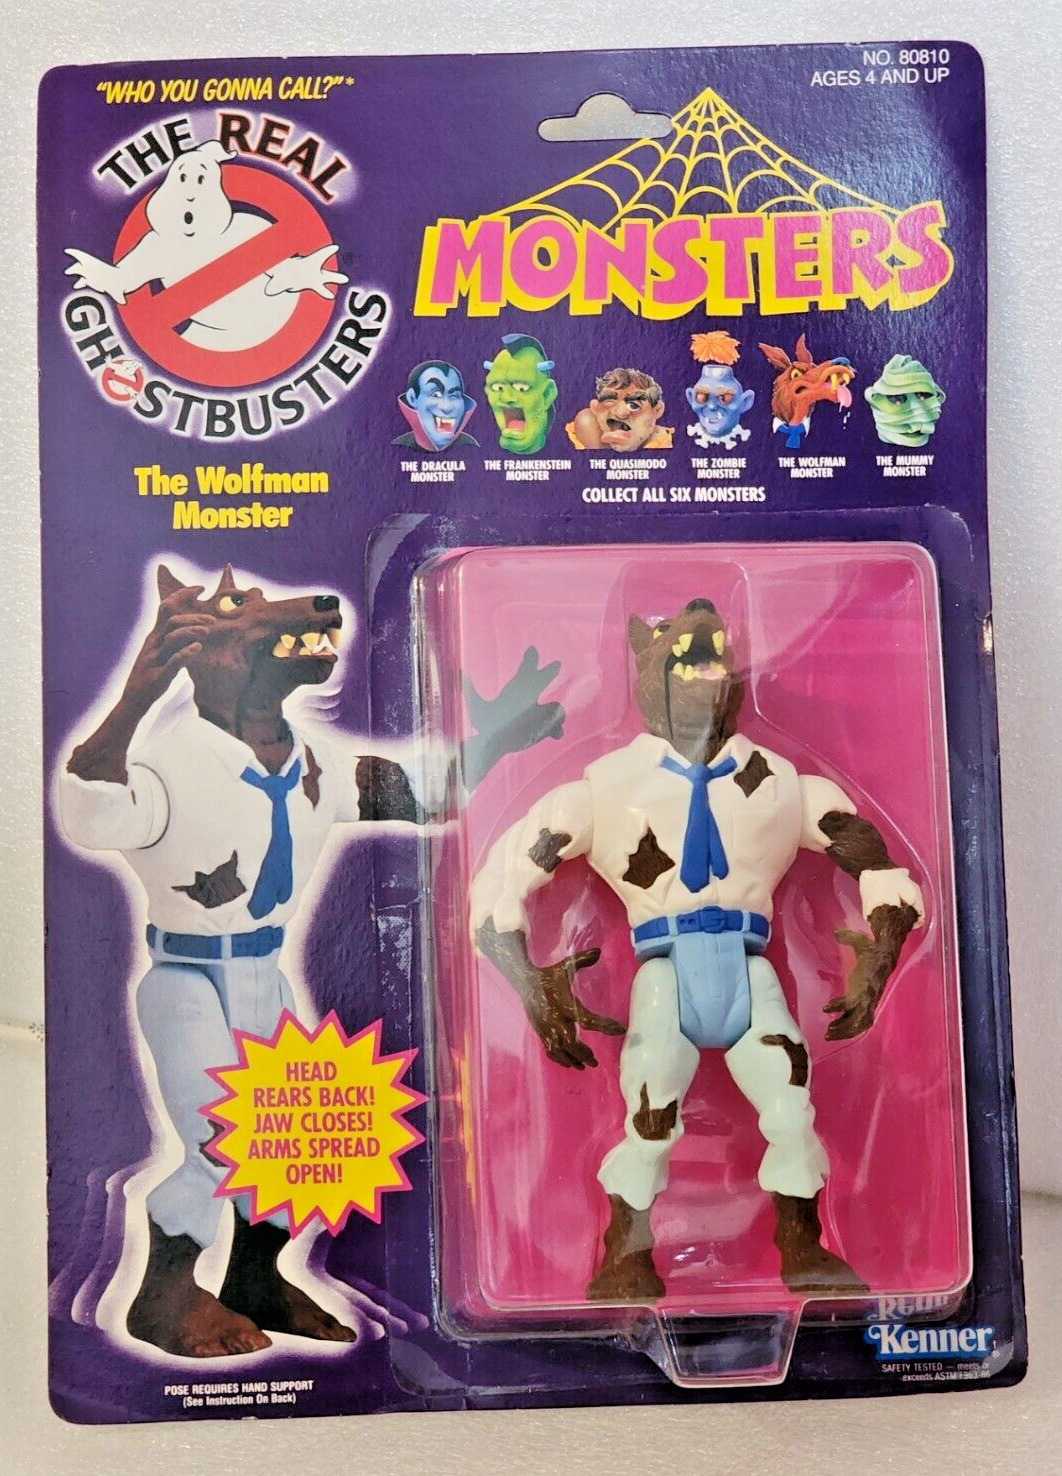 KENNER 1986 THE REAL GHOSTBUSTERS NONSTERS THE WOLFMAN MONSTER NIP